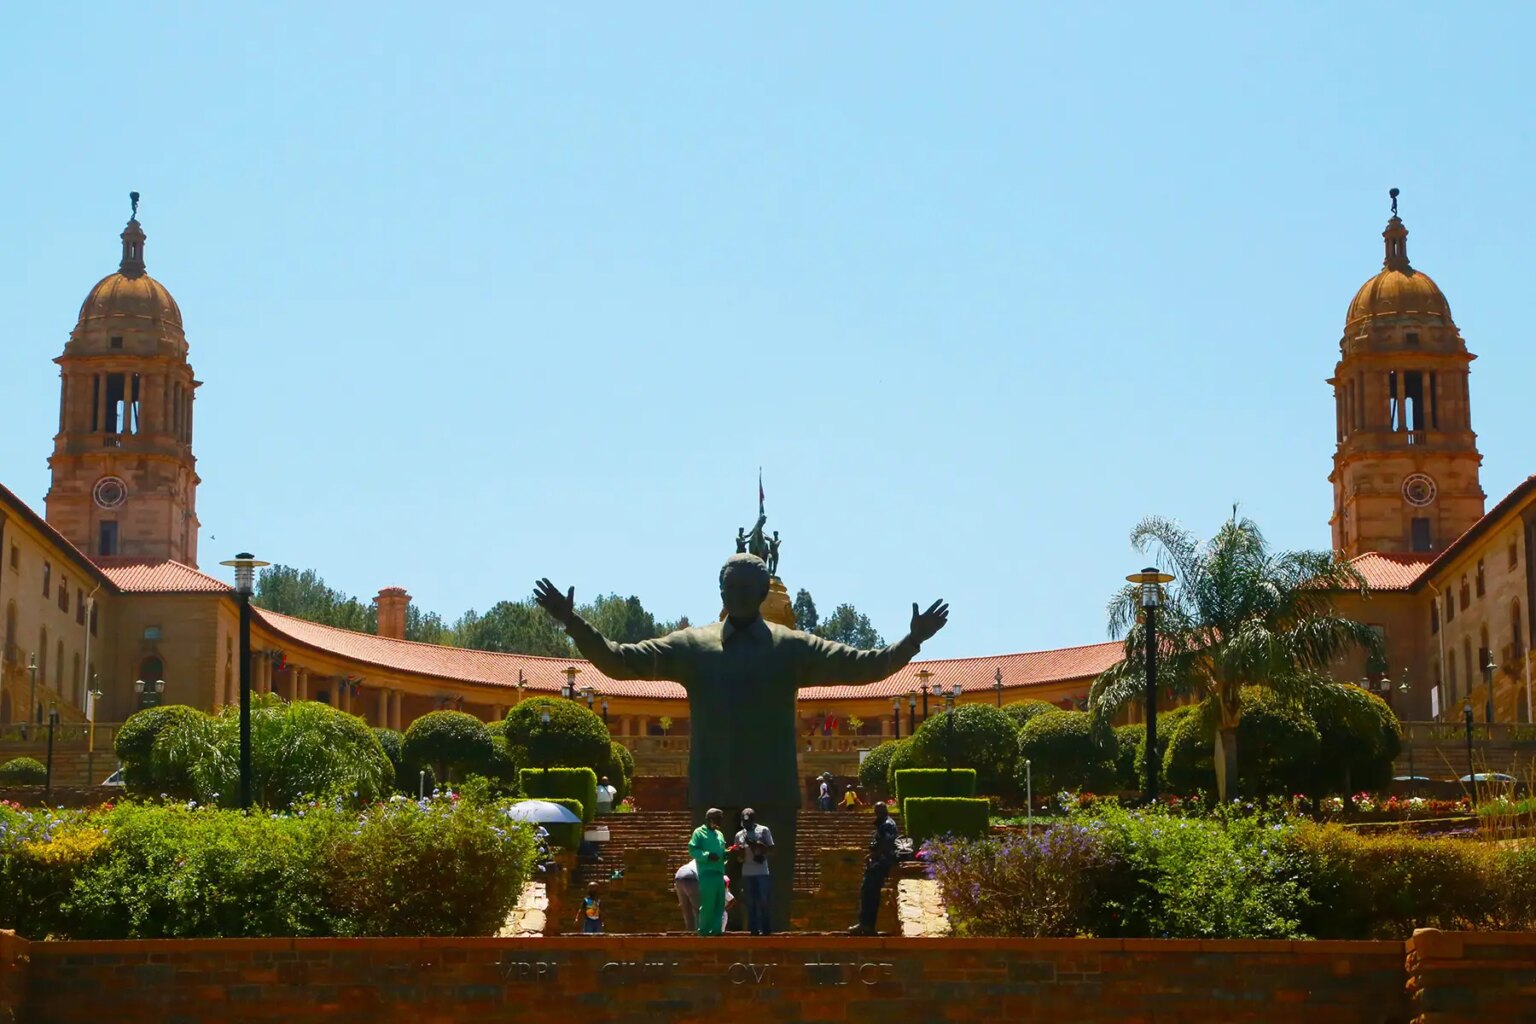 Wide shot of the Union Buildings in South Africa with a statue of Nelson Mandela